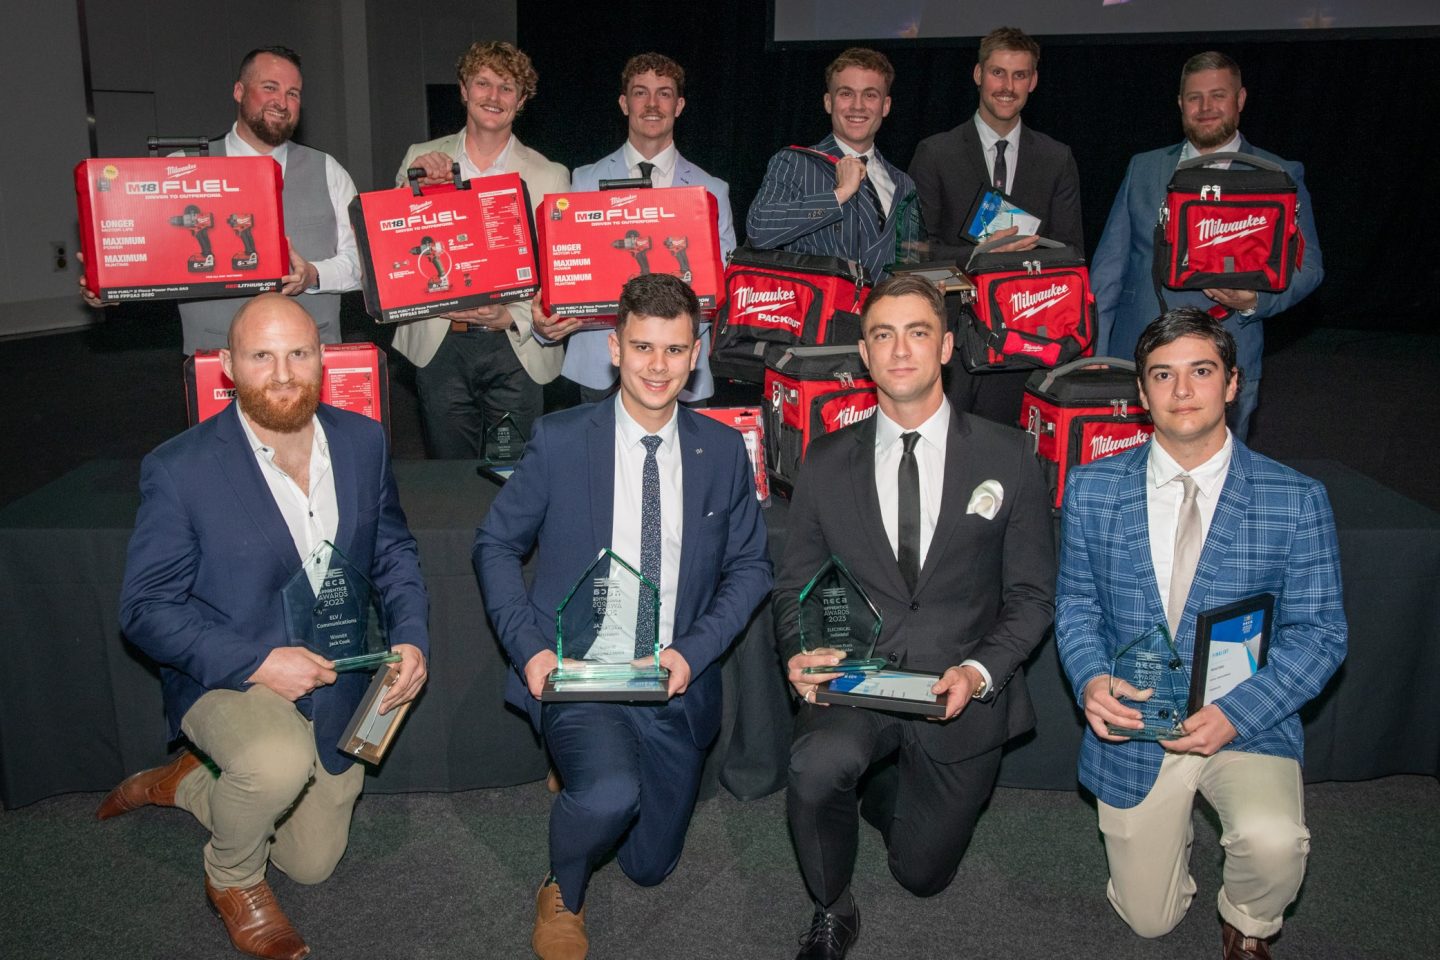 NECA electrical apprenticeships adelaide award finalists with prizes